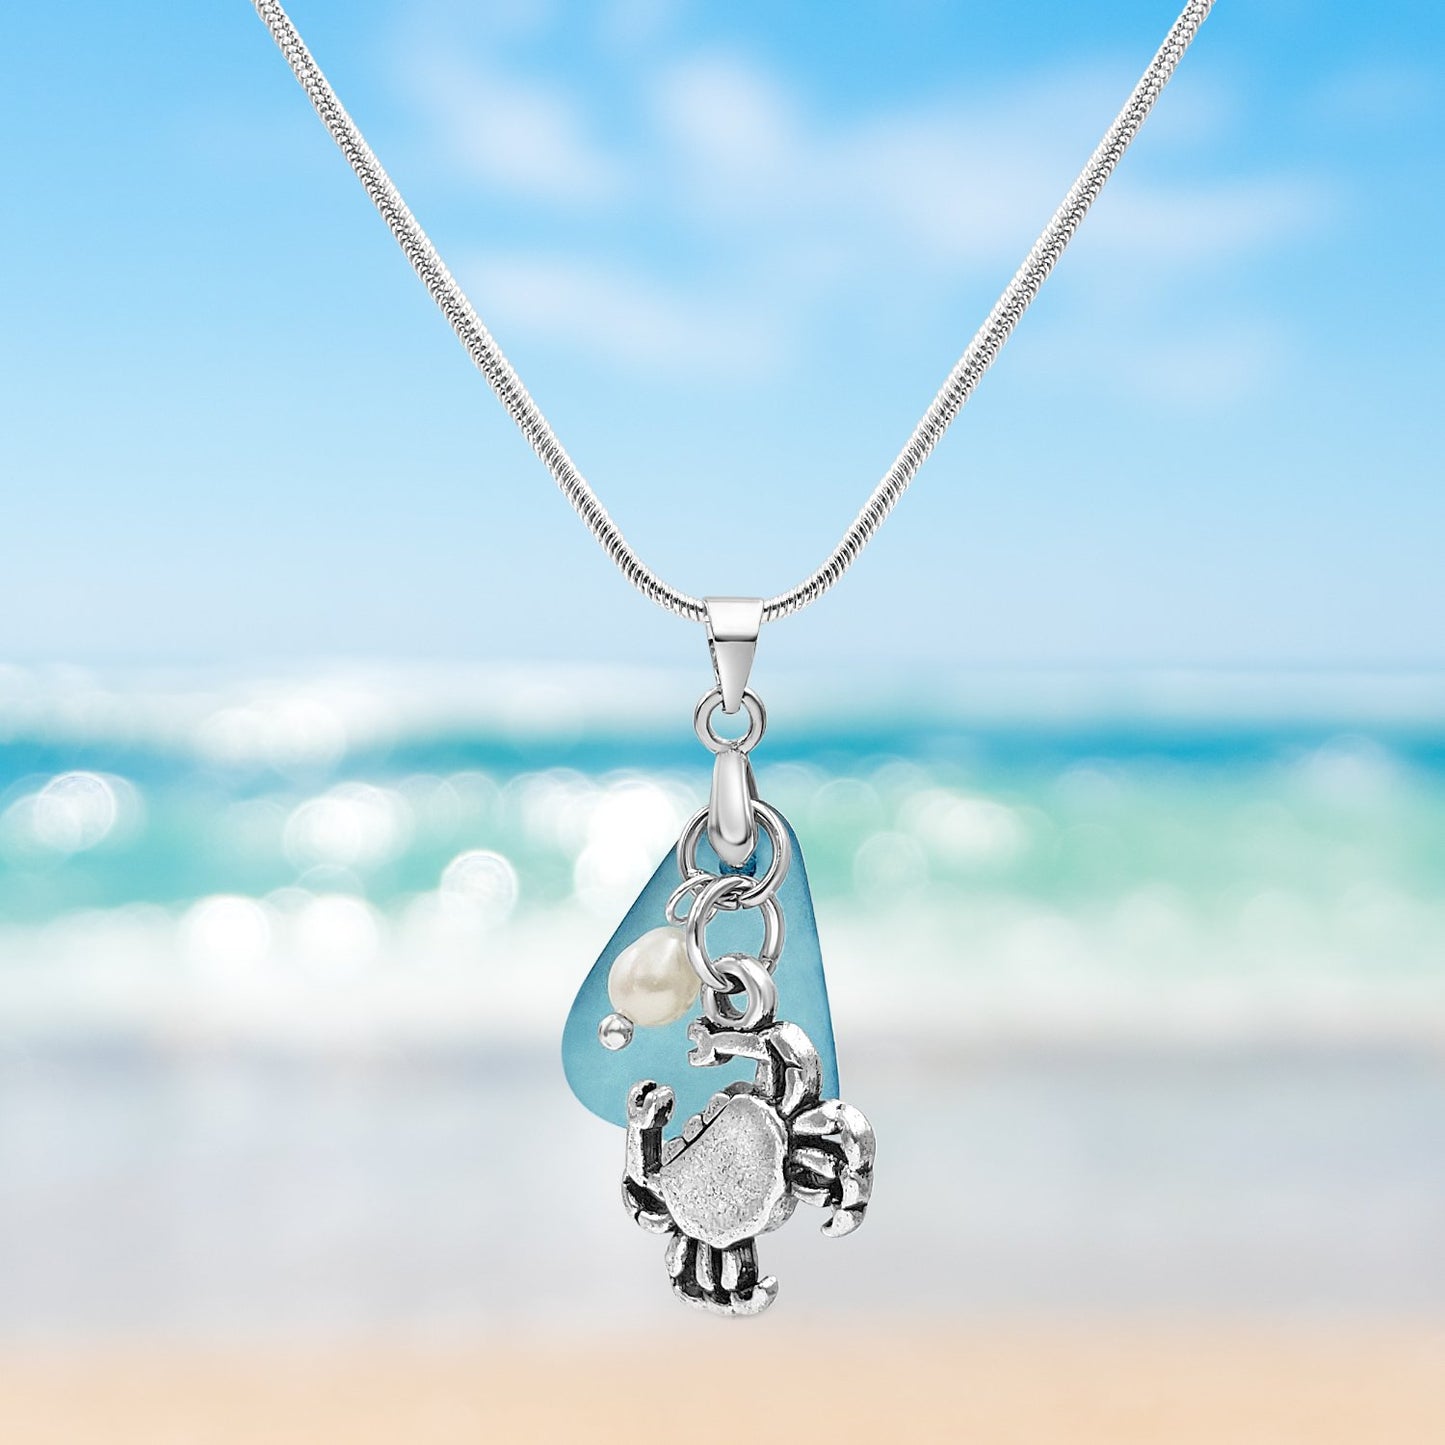 Blue Sea Glass and Crab Necklace